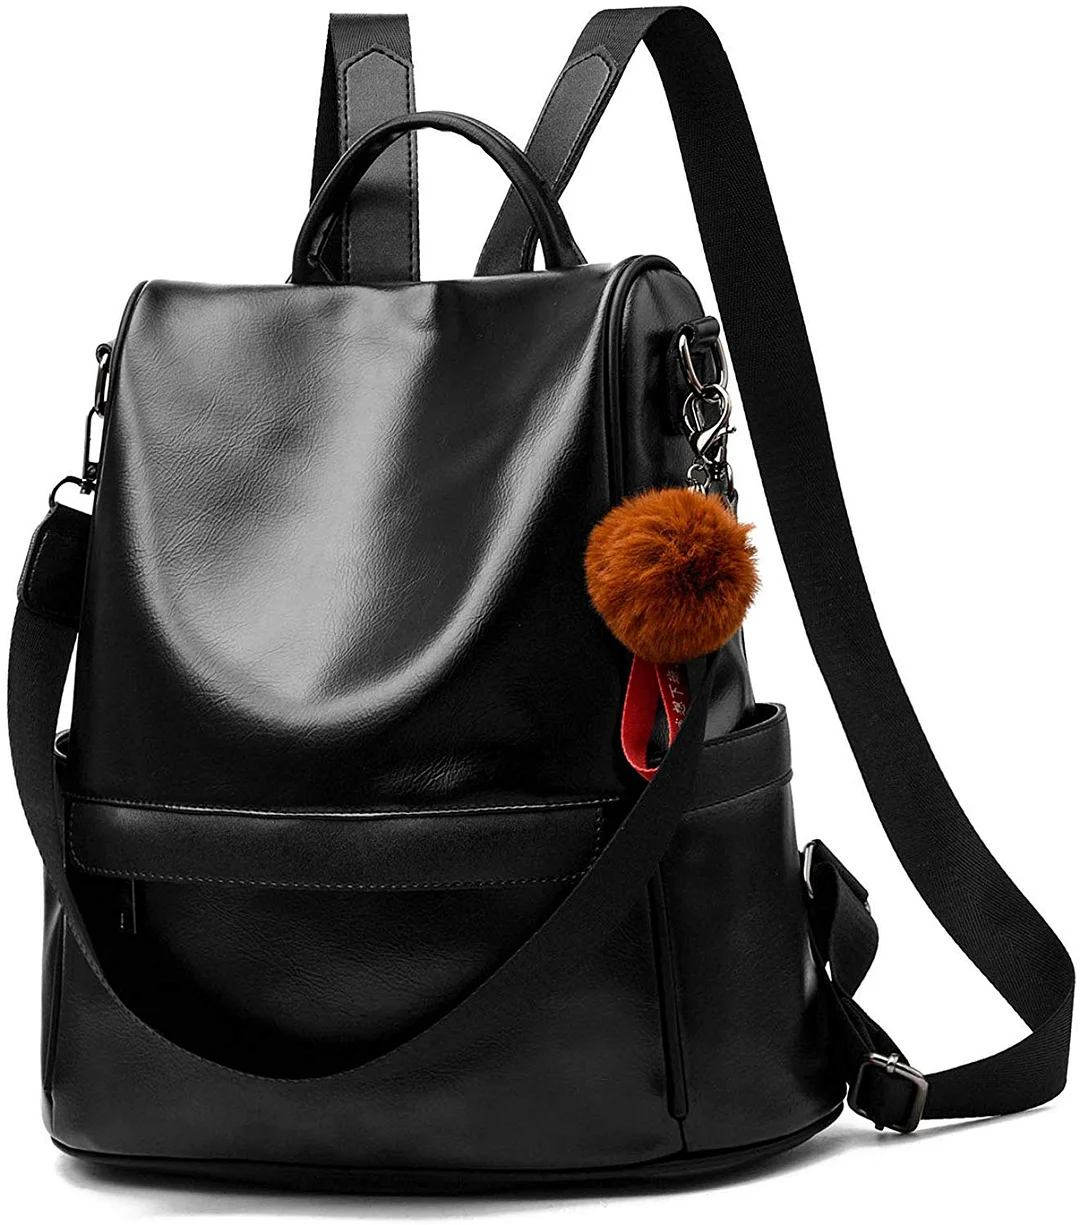 Women Backpack Purse PU Leather Anti-theft Casual Shoulder Bag Fashion Ladies Satchel Bags